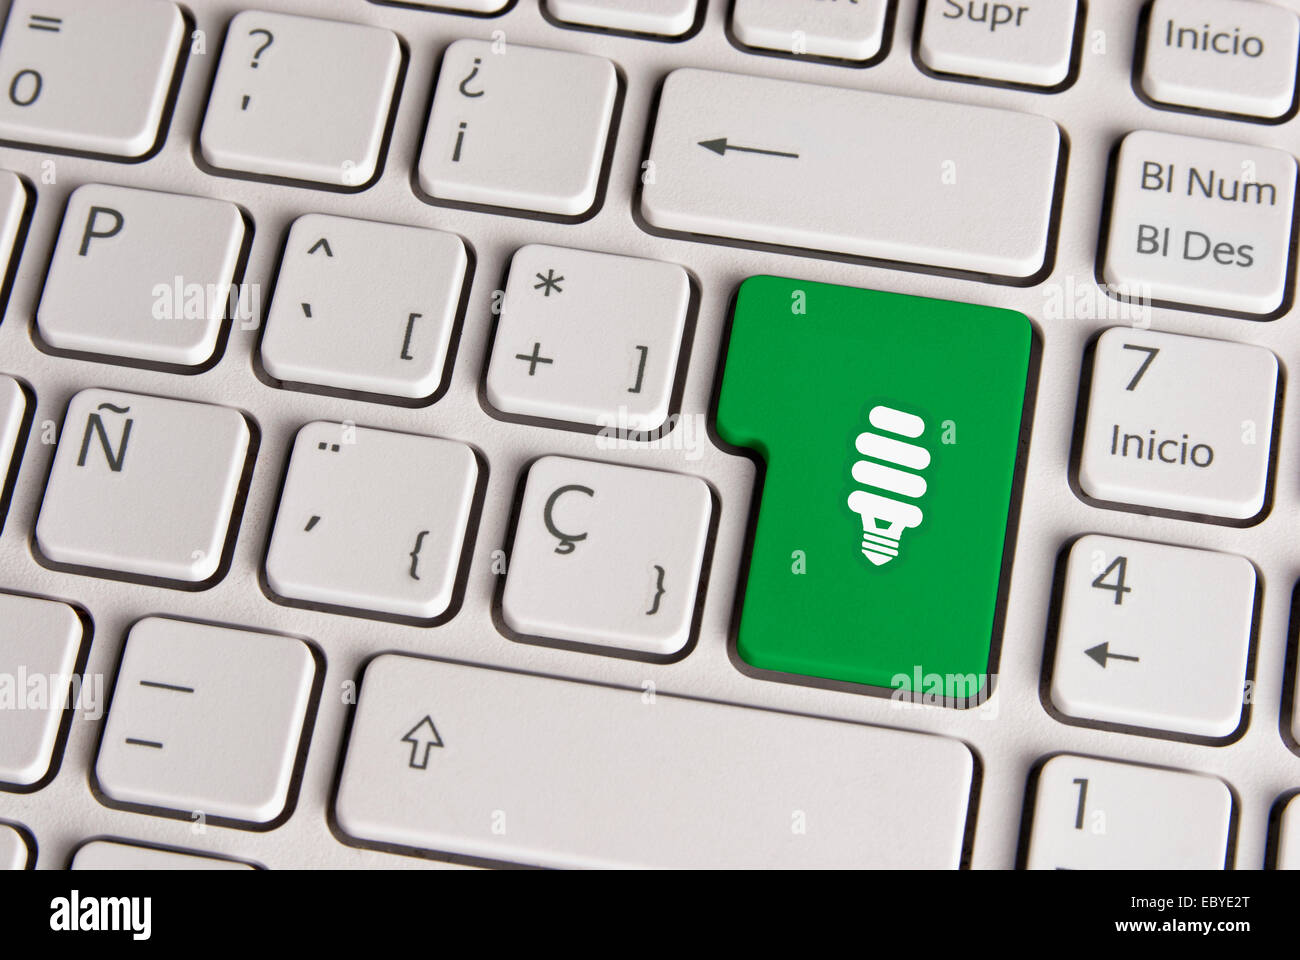 Spanish keyboard with eco energy light save bulb icon over green background button. Image with clipping path for easy change the Stock Photo